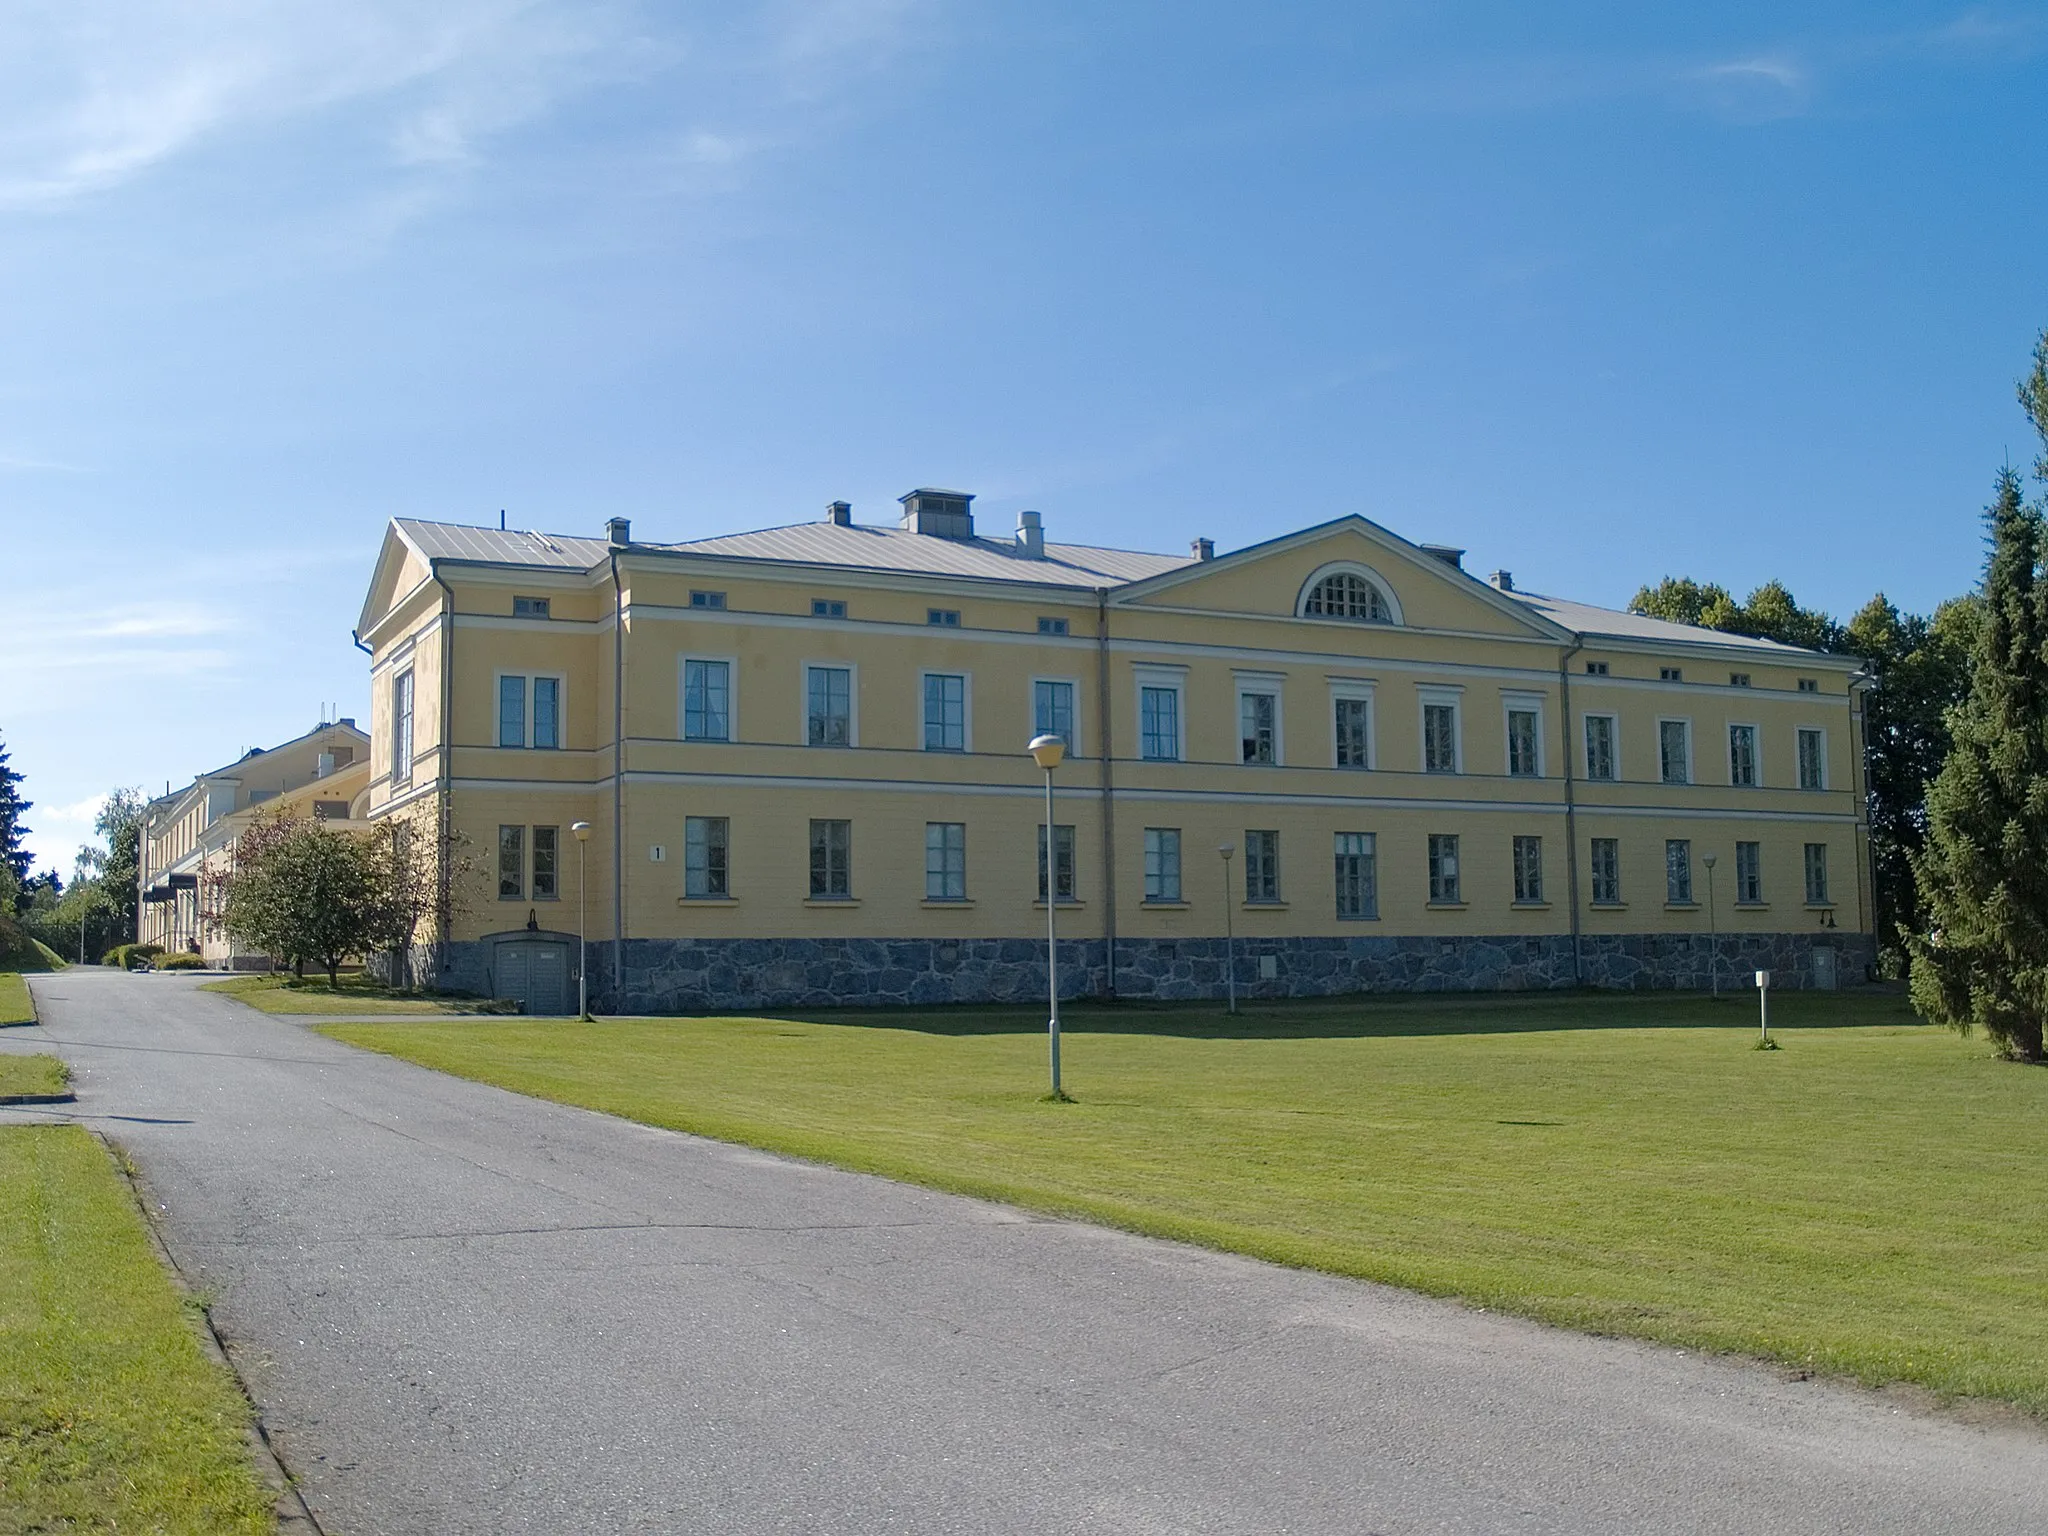 Photo showing: Vanha Vaasa Hospital in Vaasa Finland, now a state-owned psychiatric hospital.